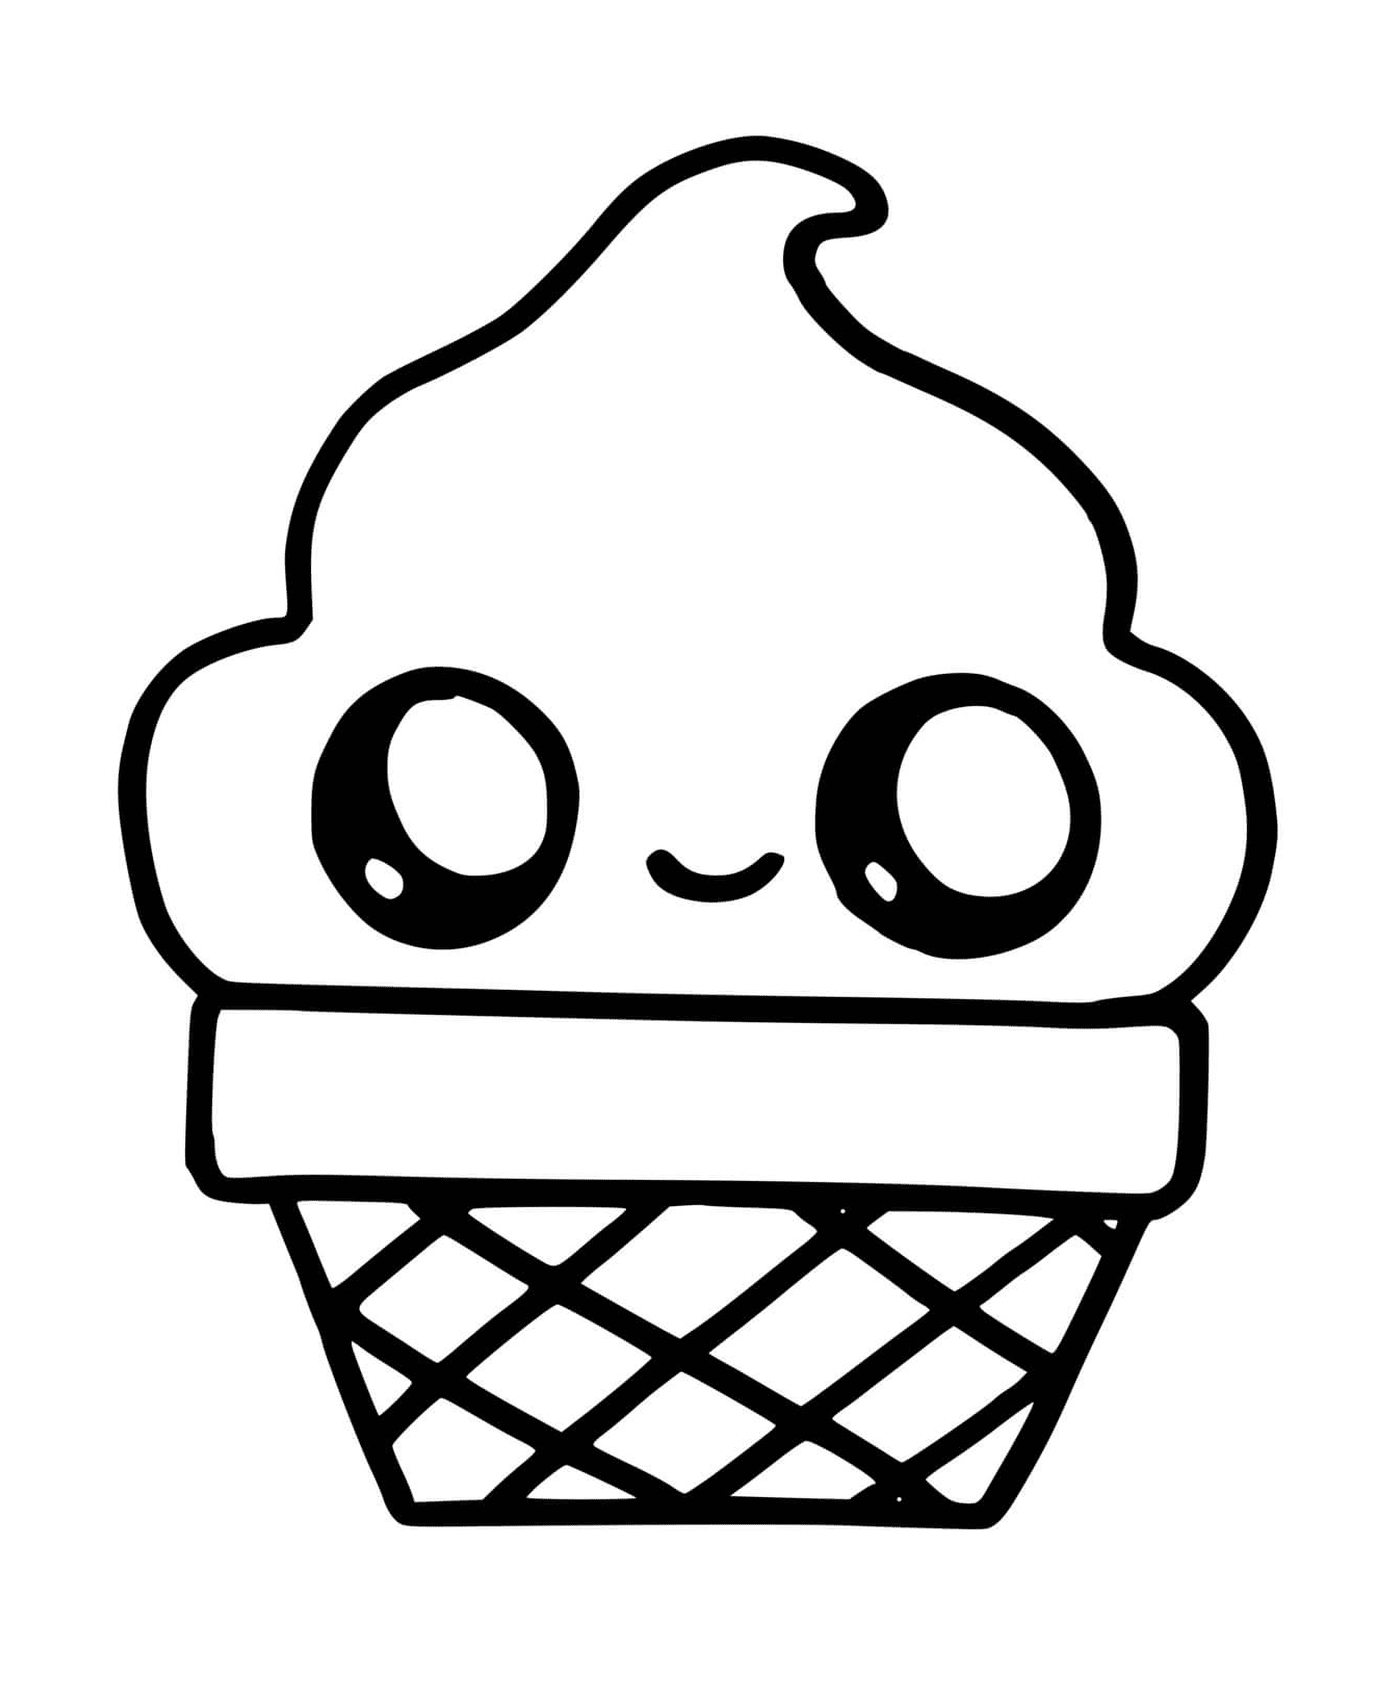  An ice cone with a smiling face drawn on it 